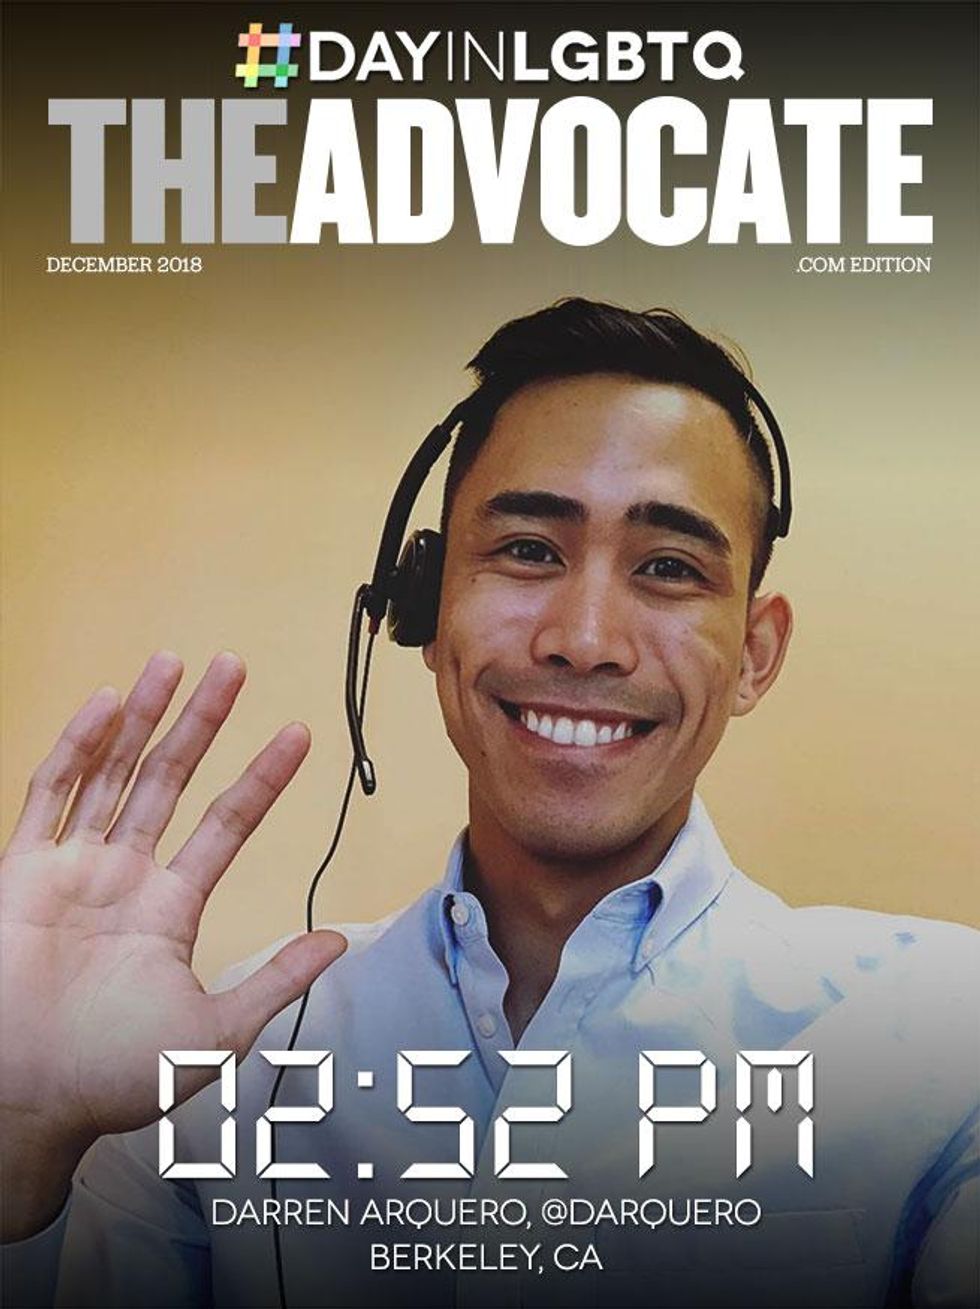 Pm-02-52-arquero-theadvocate-2018-dayinlgbt-cover-template-655